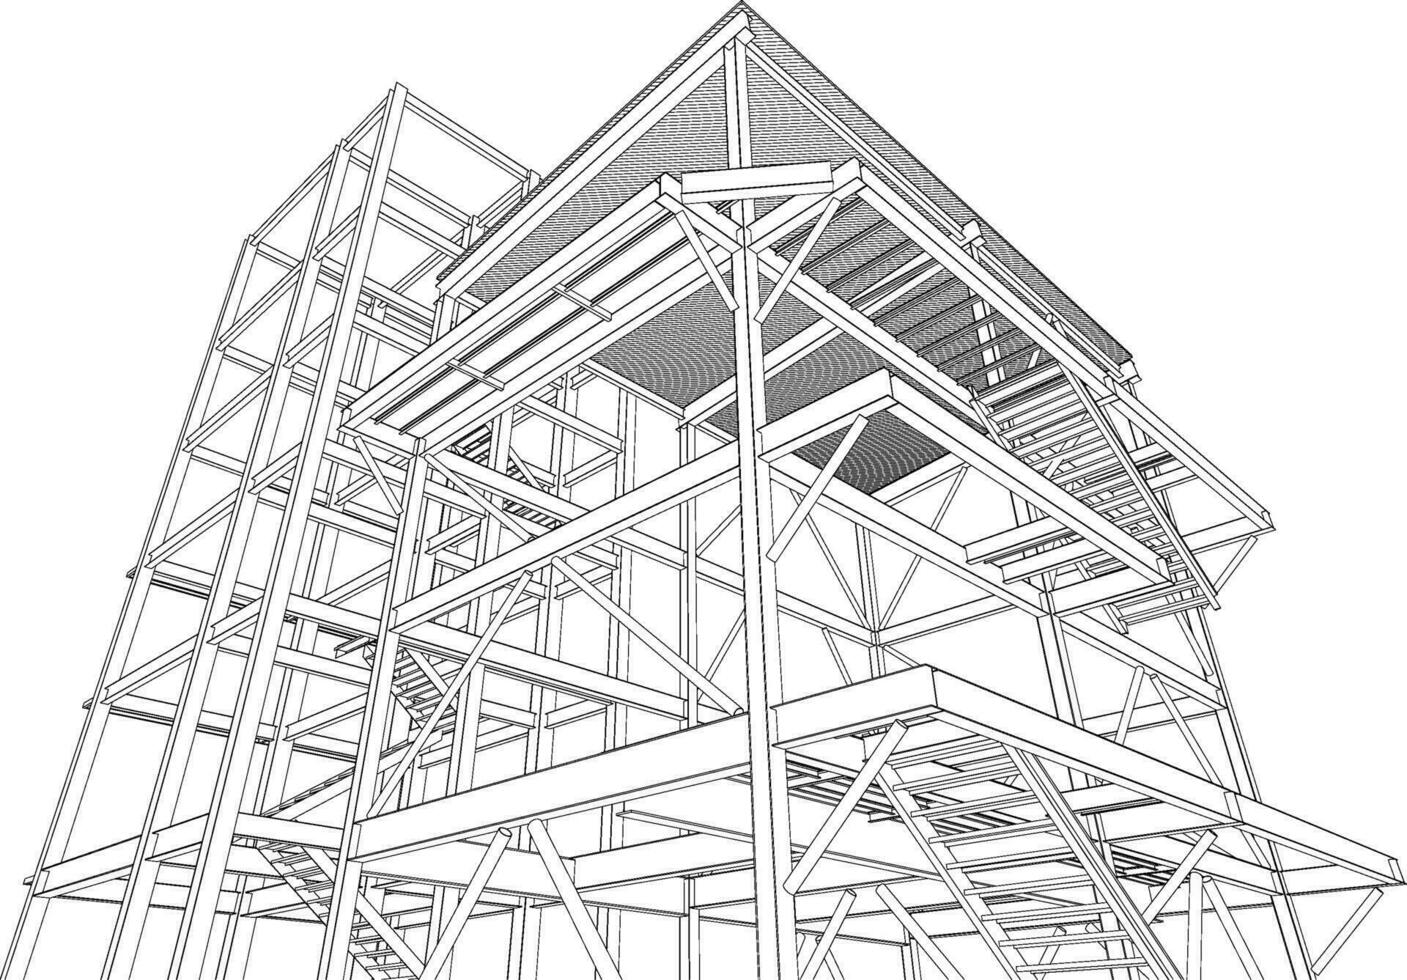 3D illustration of building structure vector